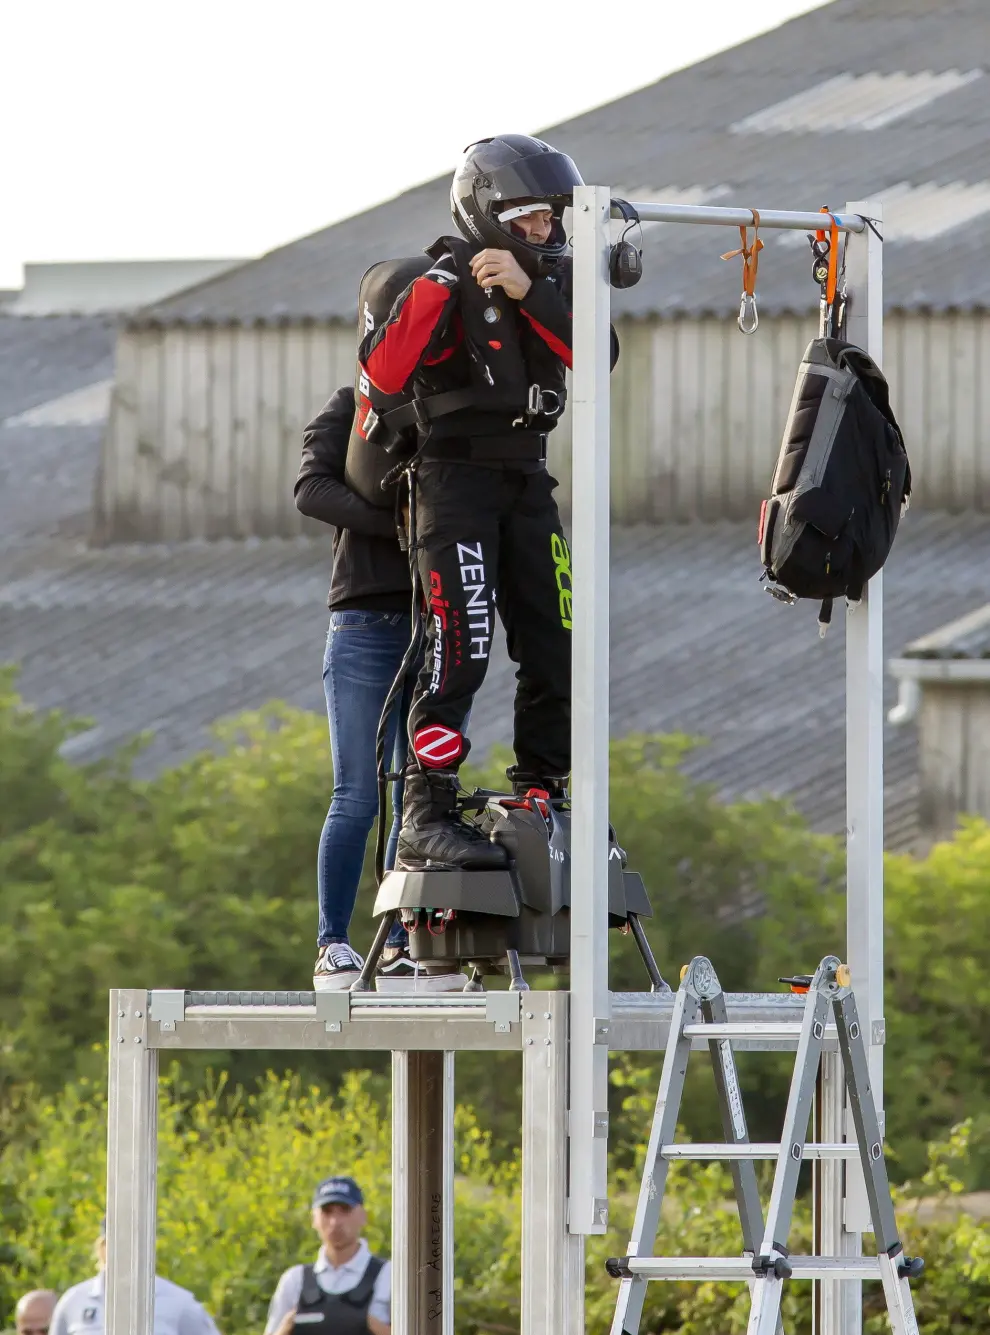 Sangatte (France), 04/08/2019.- Frenchman 'Flyman' Franky Zapata (R) prepares to cross the English Channel on a jet-powered flyboard he designed from Sangatte, France, to Saint Margaret's Bay, near Dover, Britain, 04 August 2019. French former jet-ski champion and inventor Franky Zapata has failed in his first attempt to cross the English Channel on his jet-powered flyboard, from northern France to southern England in just 20 minutes, on 25 July 2019. (Francia, Reino Unido) EFE/EPA/SEBASTIEN COURDJI French inventor Franky Zapata crossing English Channel by flyboard